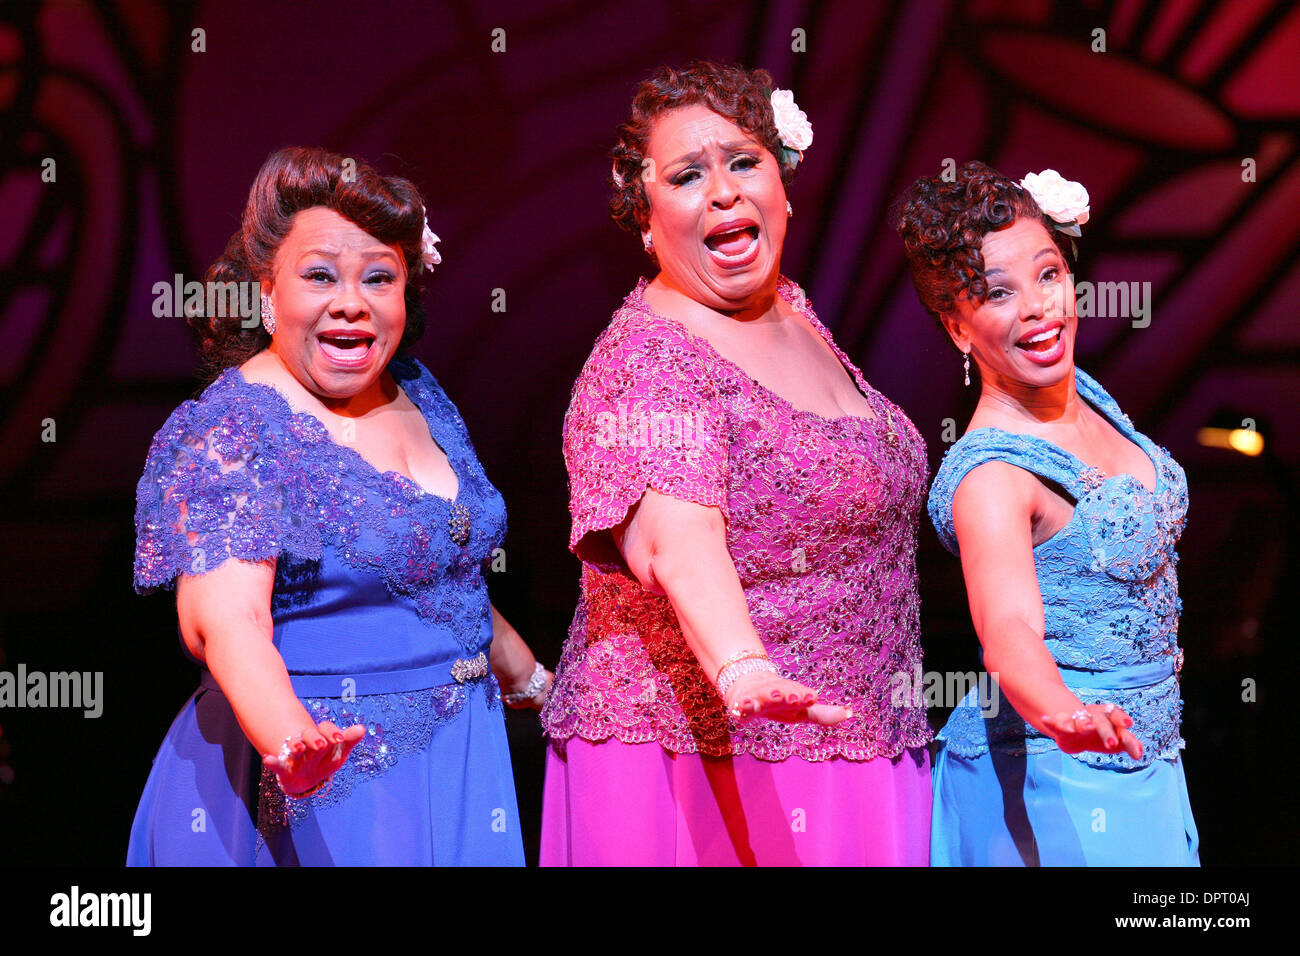 Apr 17, 2009 - Los Angeles, California, United States - Artists ARMELIA MCQUEEN, ROZ RYAN and DEBRA WALTON perform on stage during a dress rehearsal for the musical show 'Ain't Misbeavin' at the Ahmanson Theatre. (Credit Image: © Ringo Chiu/ZUMA Press) Stock Photo